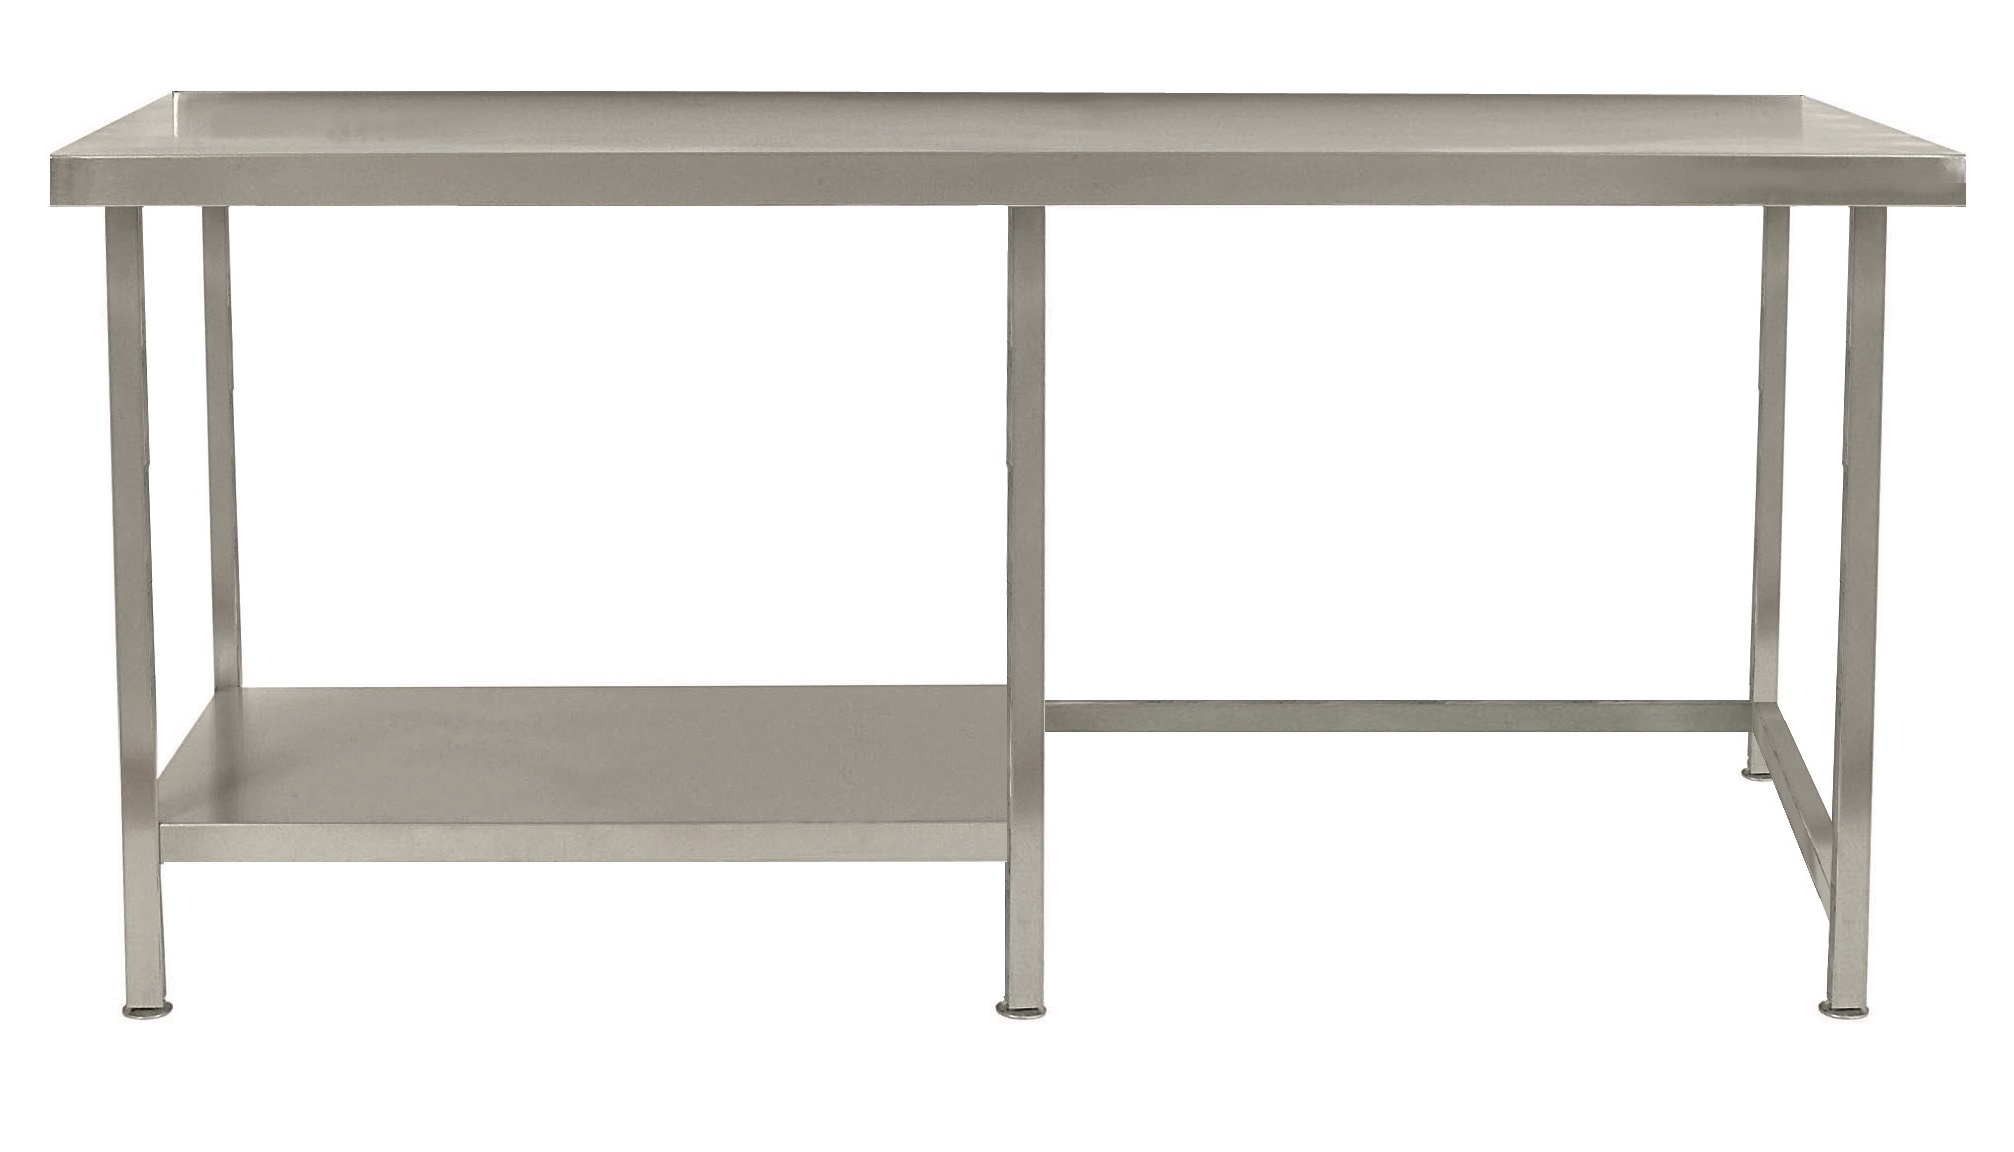 Parry TABHL - Stainless Steel Table With Part Undershelf Left Hand Side